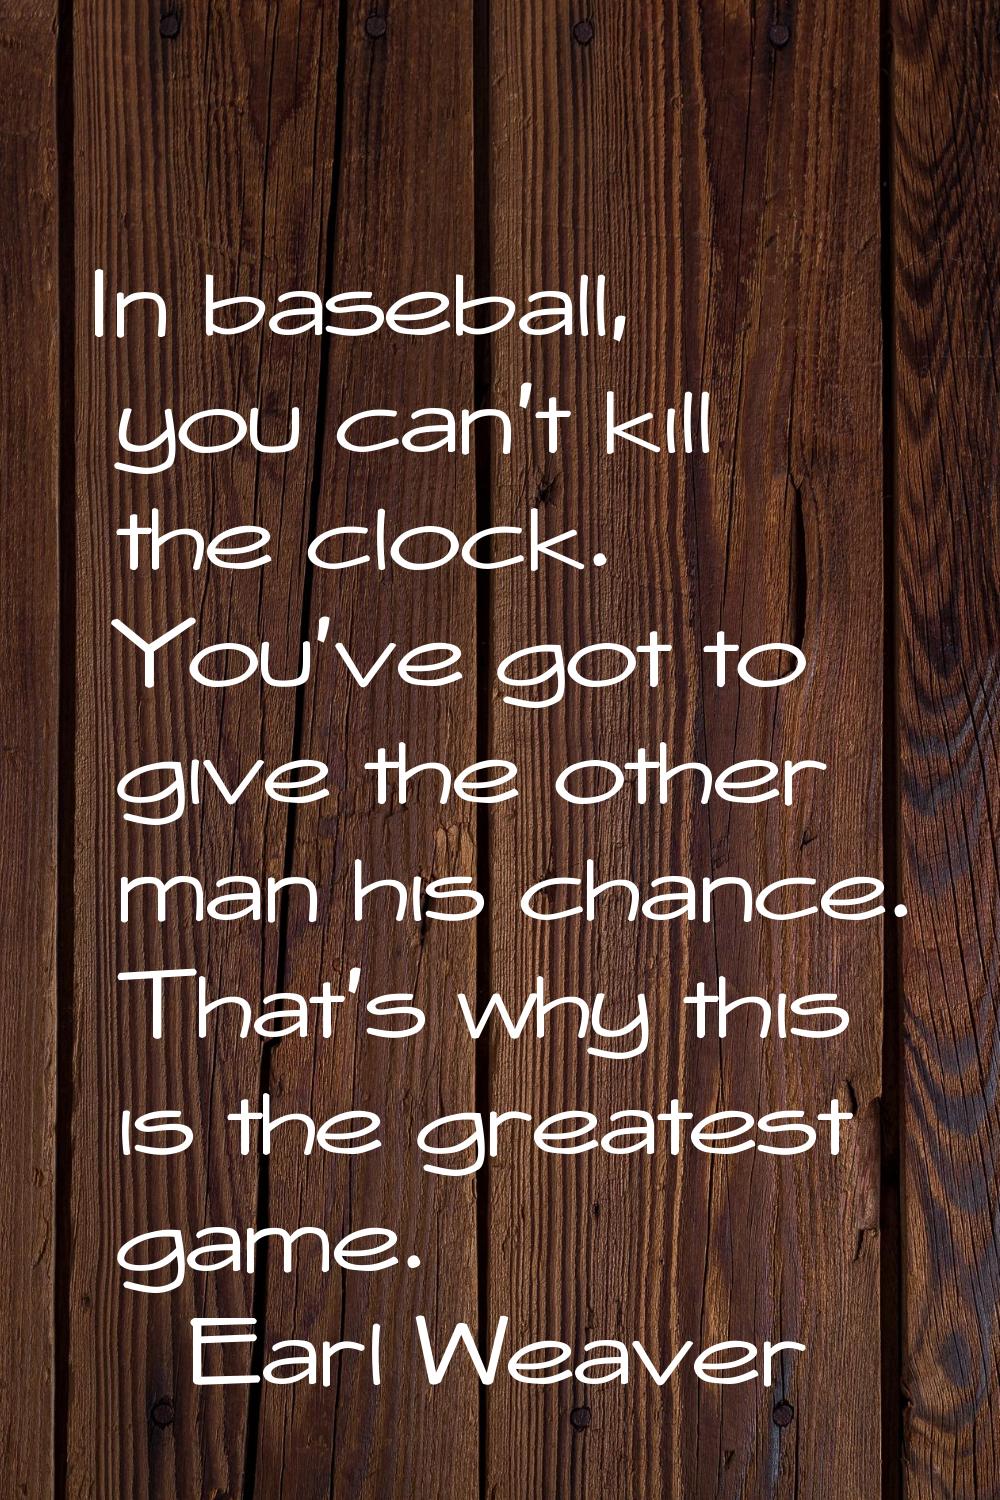 In baseball, you can't kill the clock. You've got to give the other man his chance. That's why this